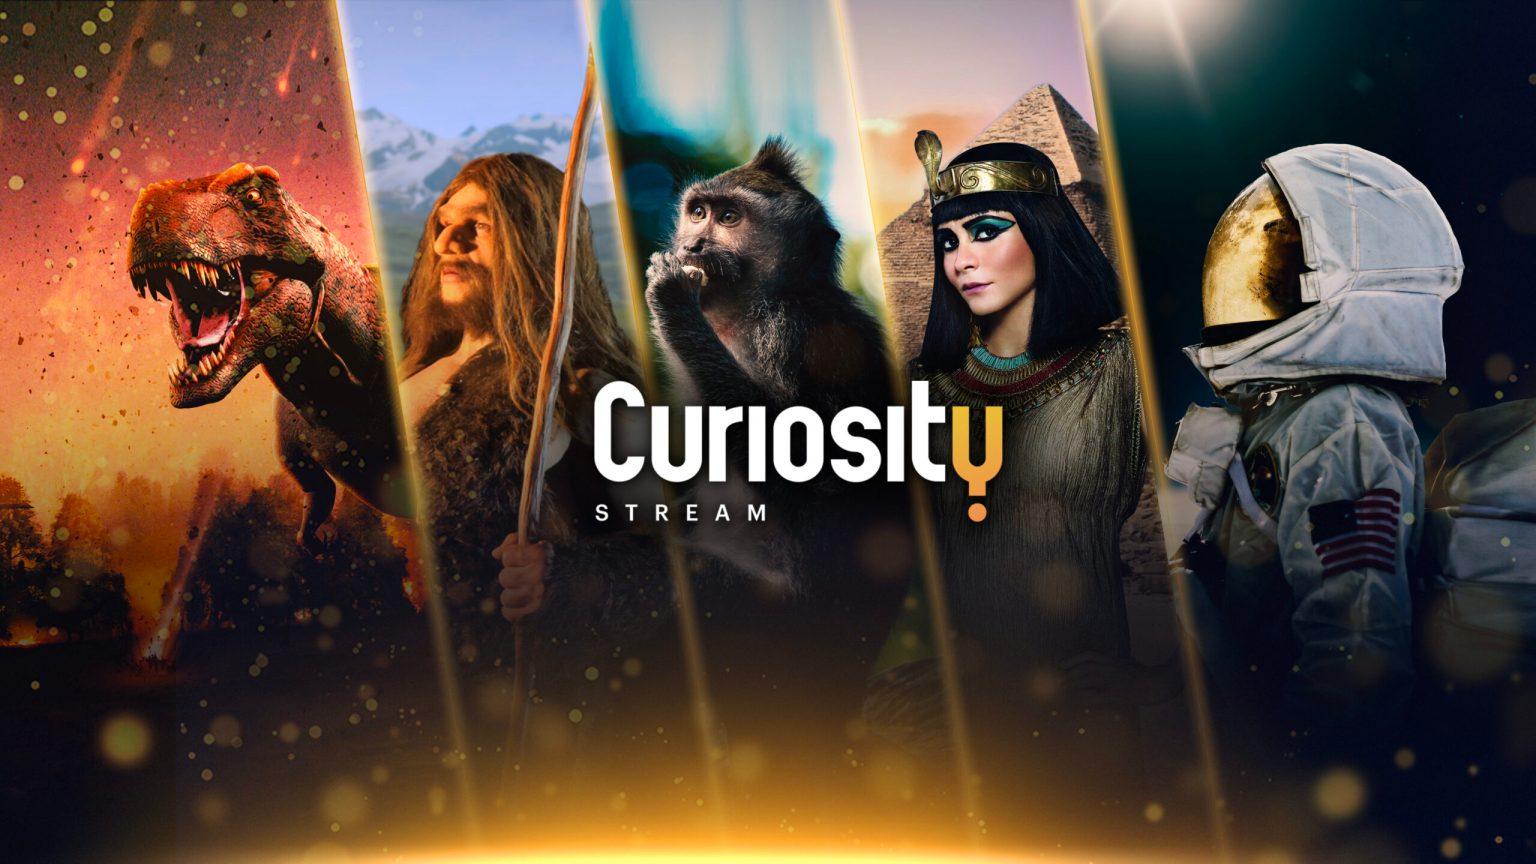 Get One Year of Curiosity Stream for Just $14.99 During the New Year Sale